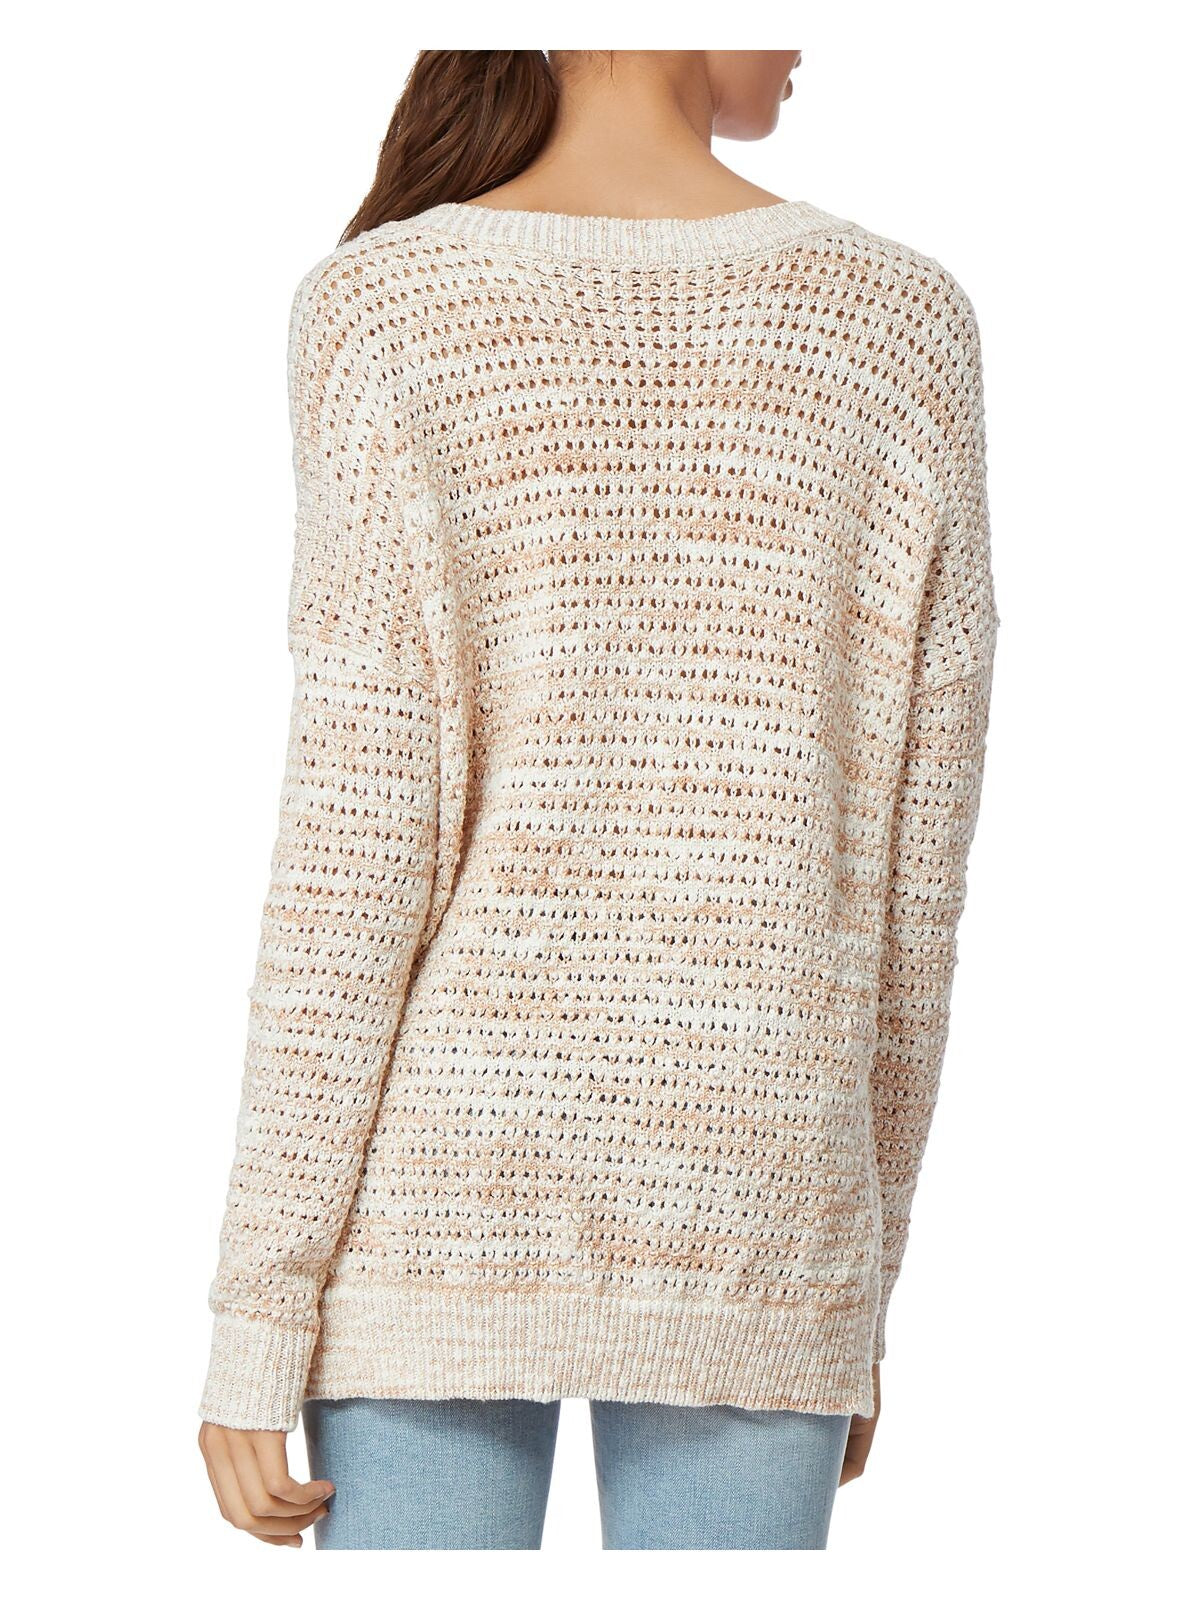 HABITUAL Womens Beige Sheer Ribbed Vented Sides Unlined Heather Long Sleeve V Neck Sweater XL